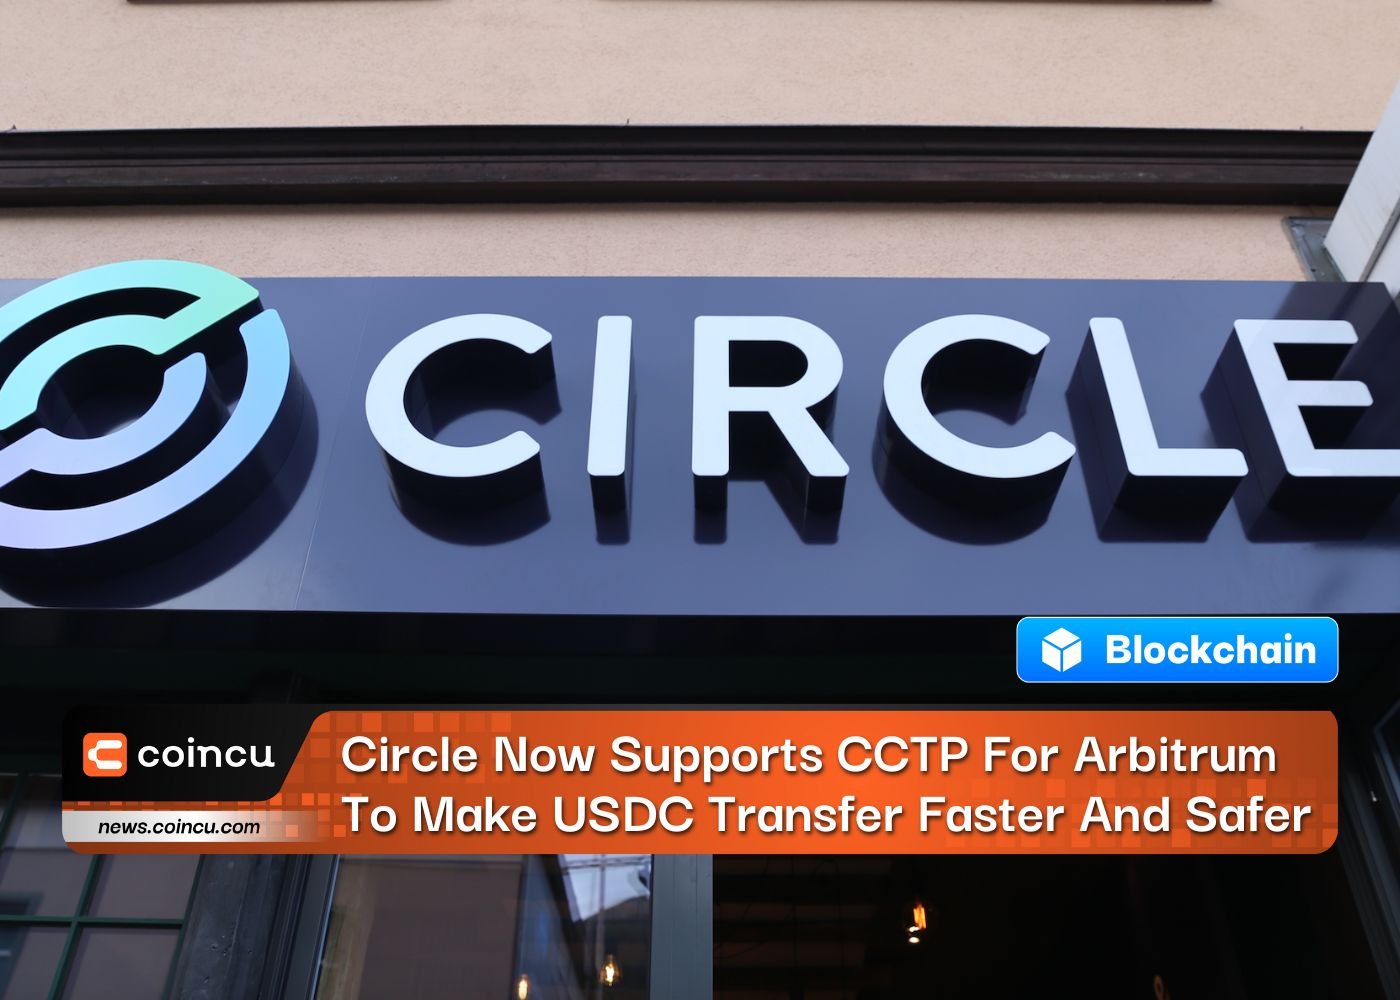 Circle Now Supports CCTP For Arbitrum To Make USDC Transfer Faster And Safer